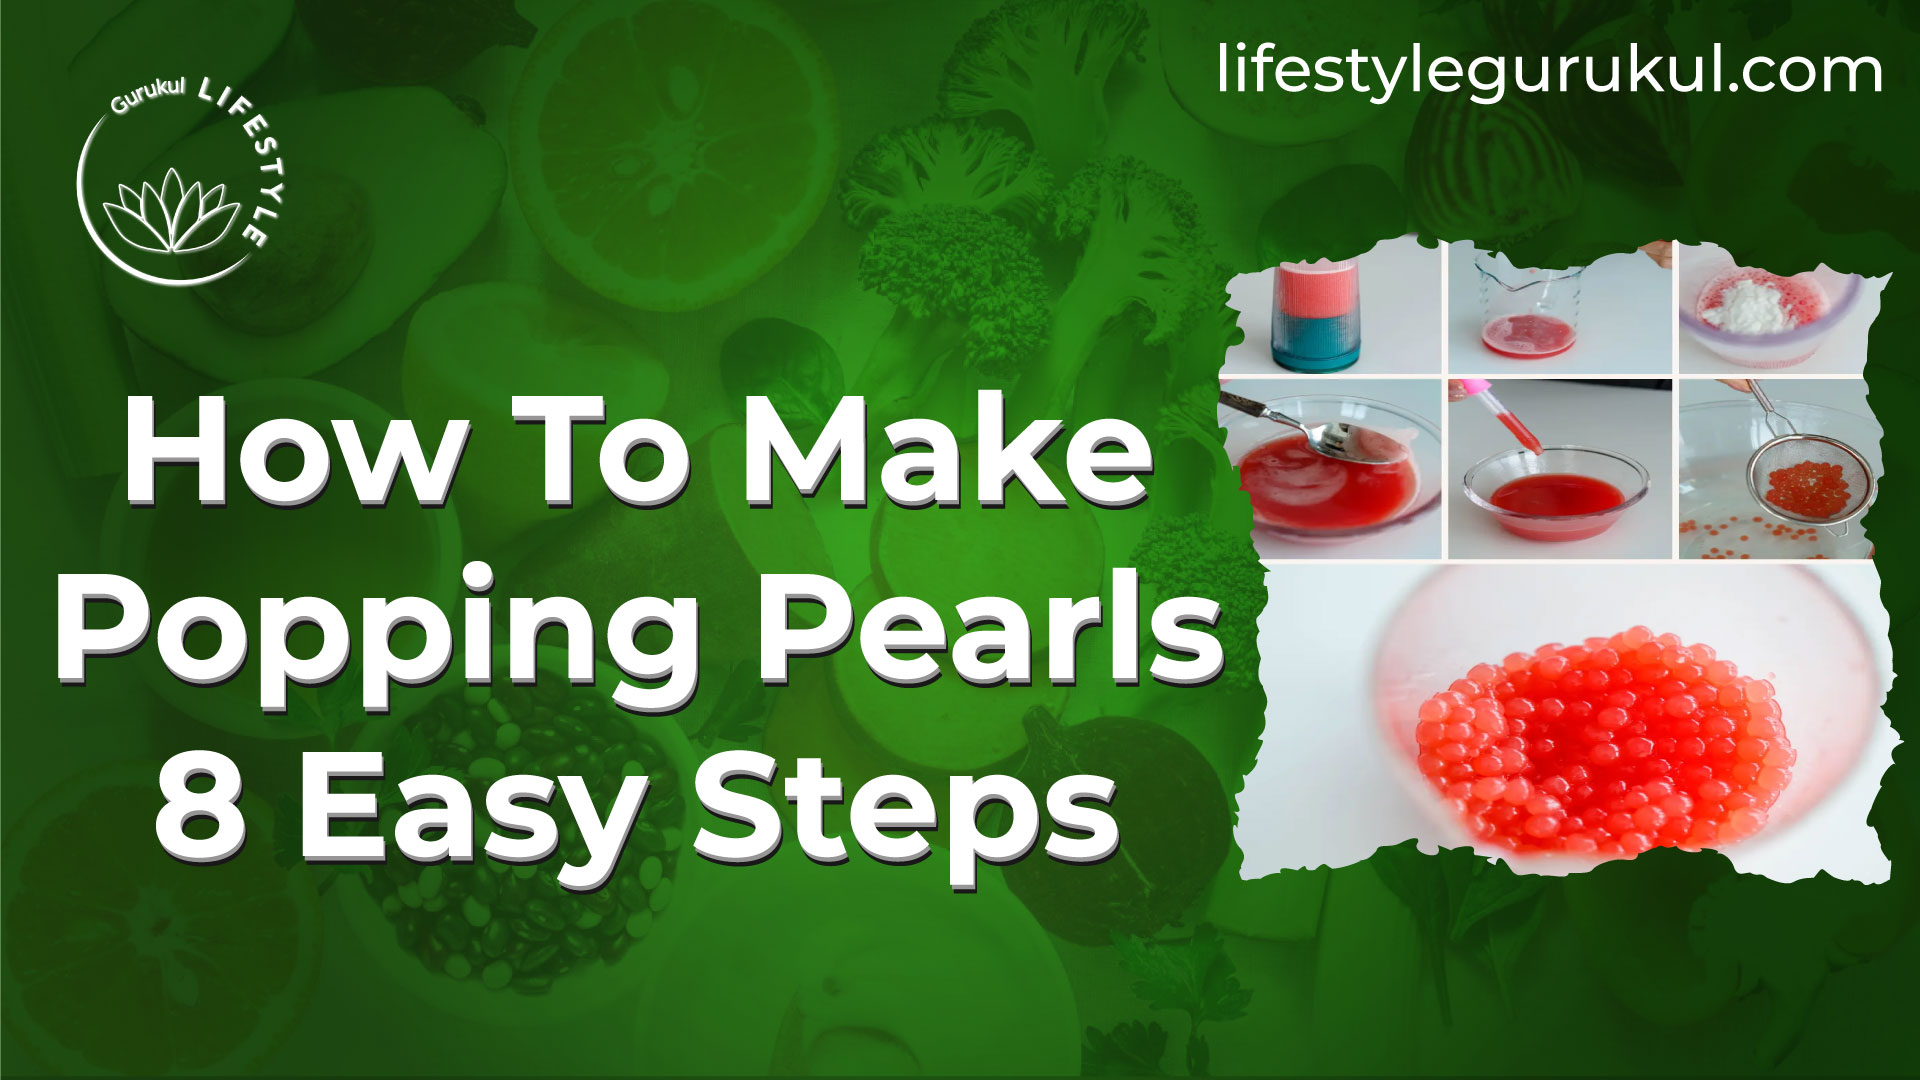 How To Make Popping Pearls – 8 Easy Steps